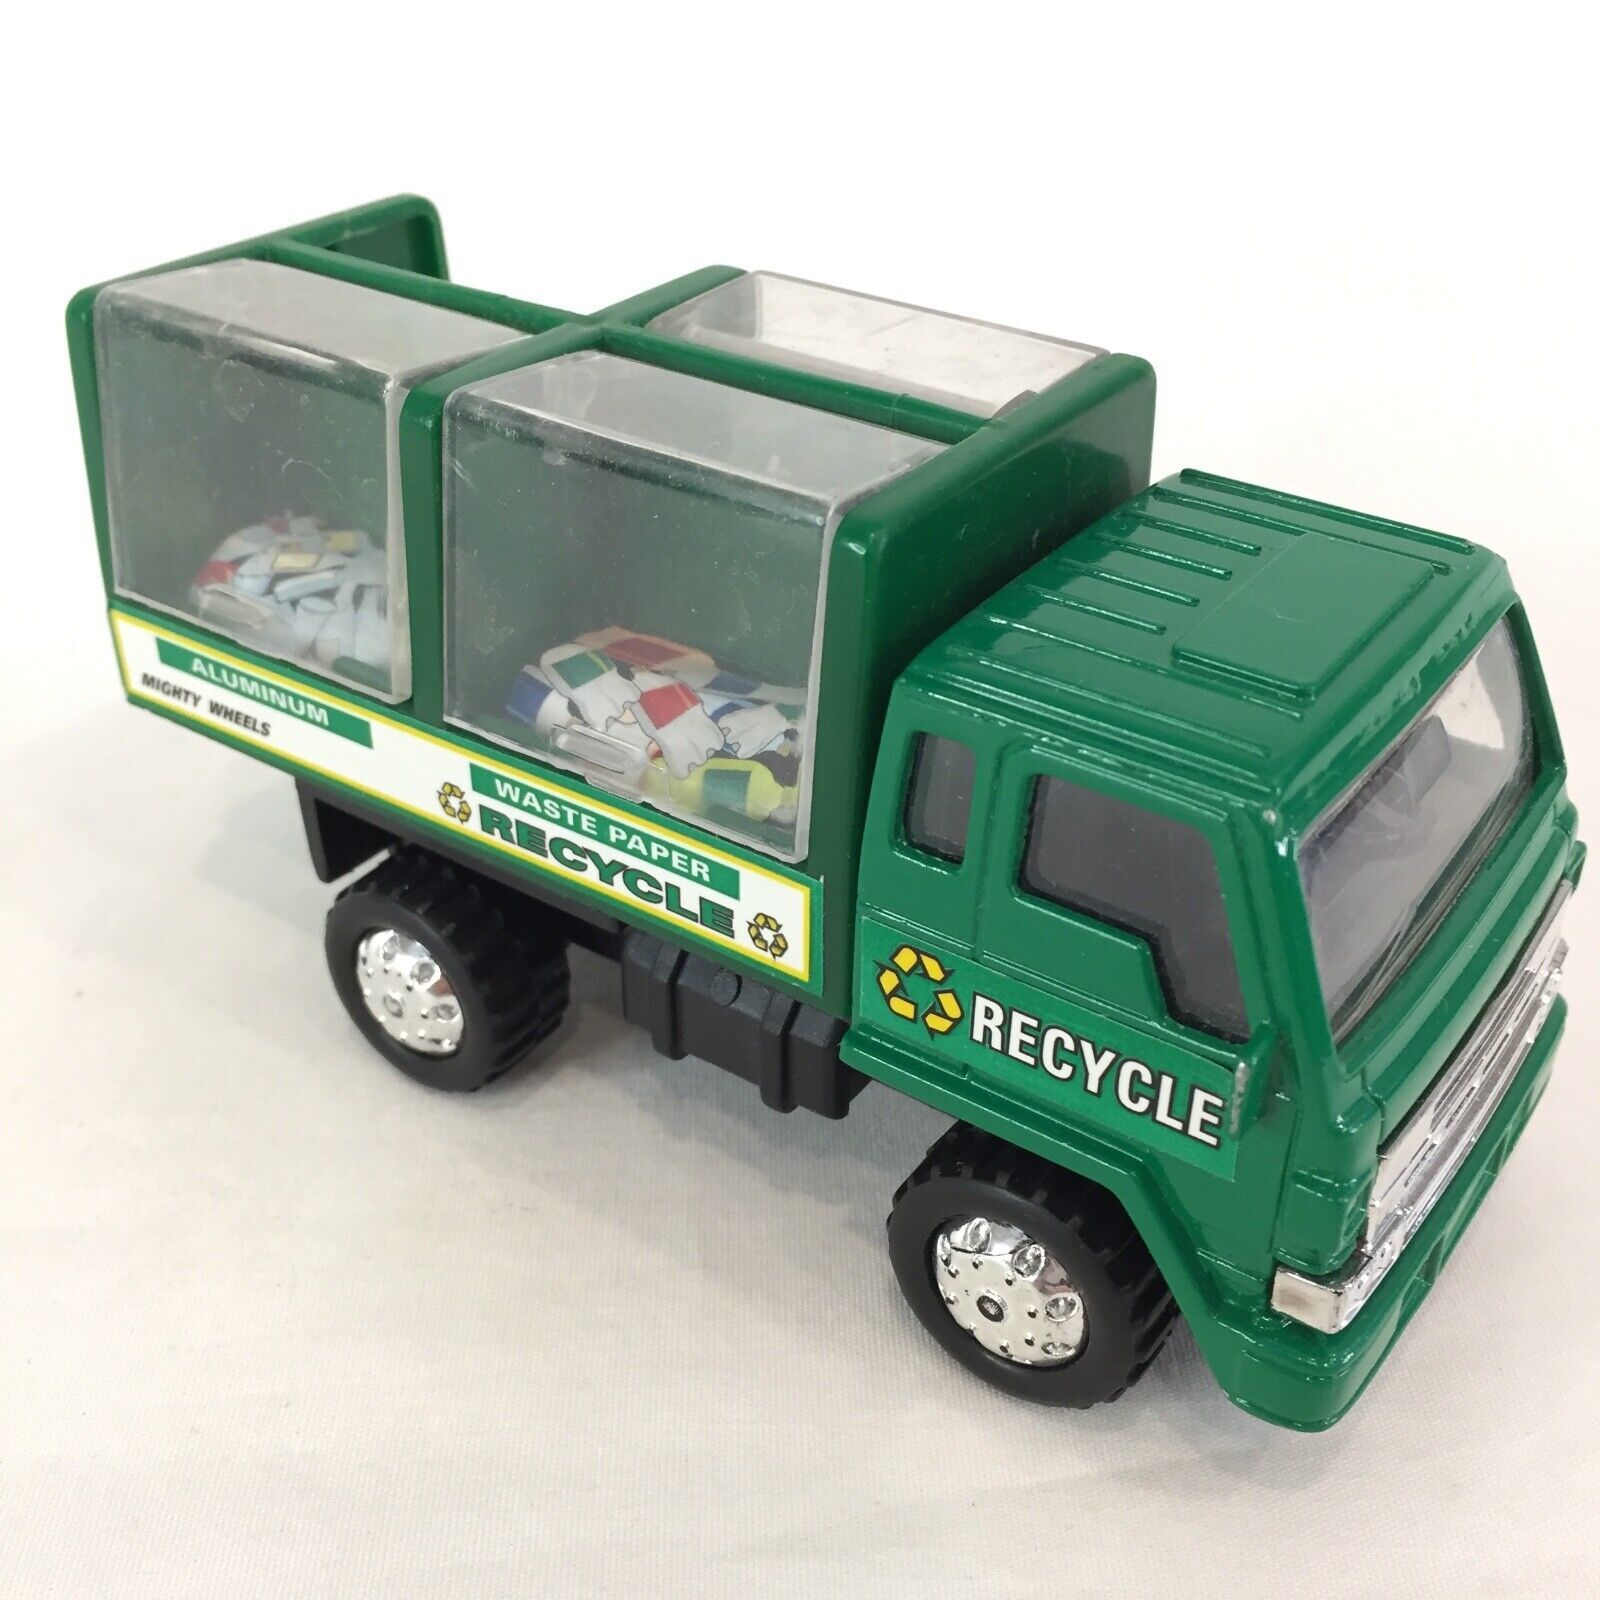 Mighty Wheels Green Recycle Garbage Truck Dinky Car Diecast Toy  Play Used 4.5 " - $10.78